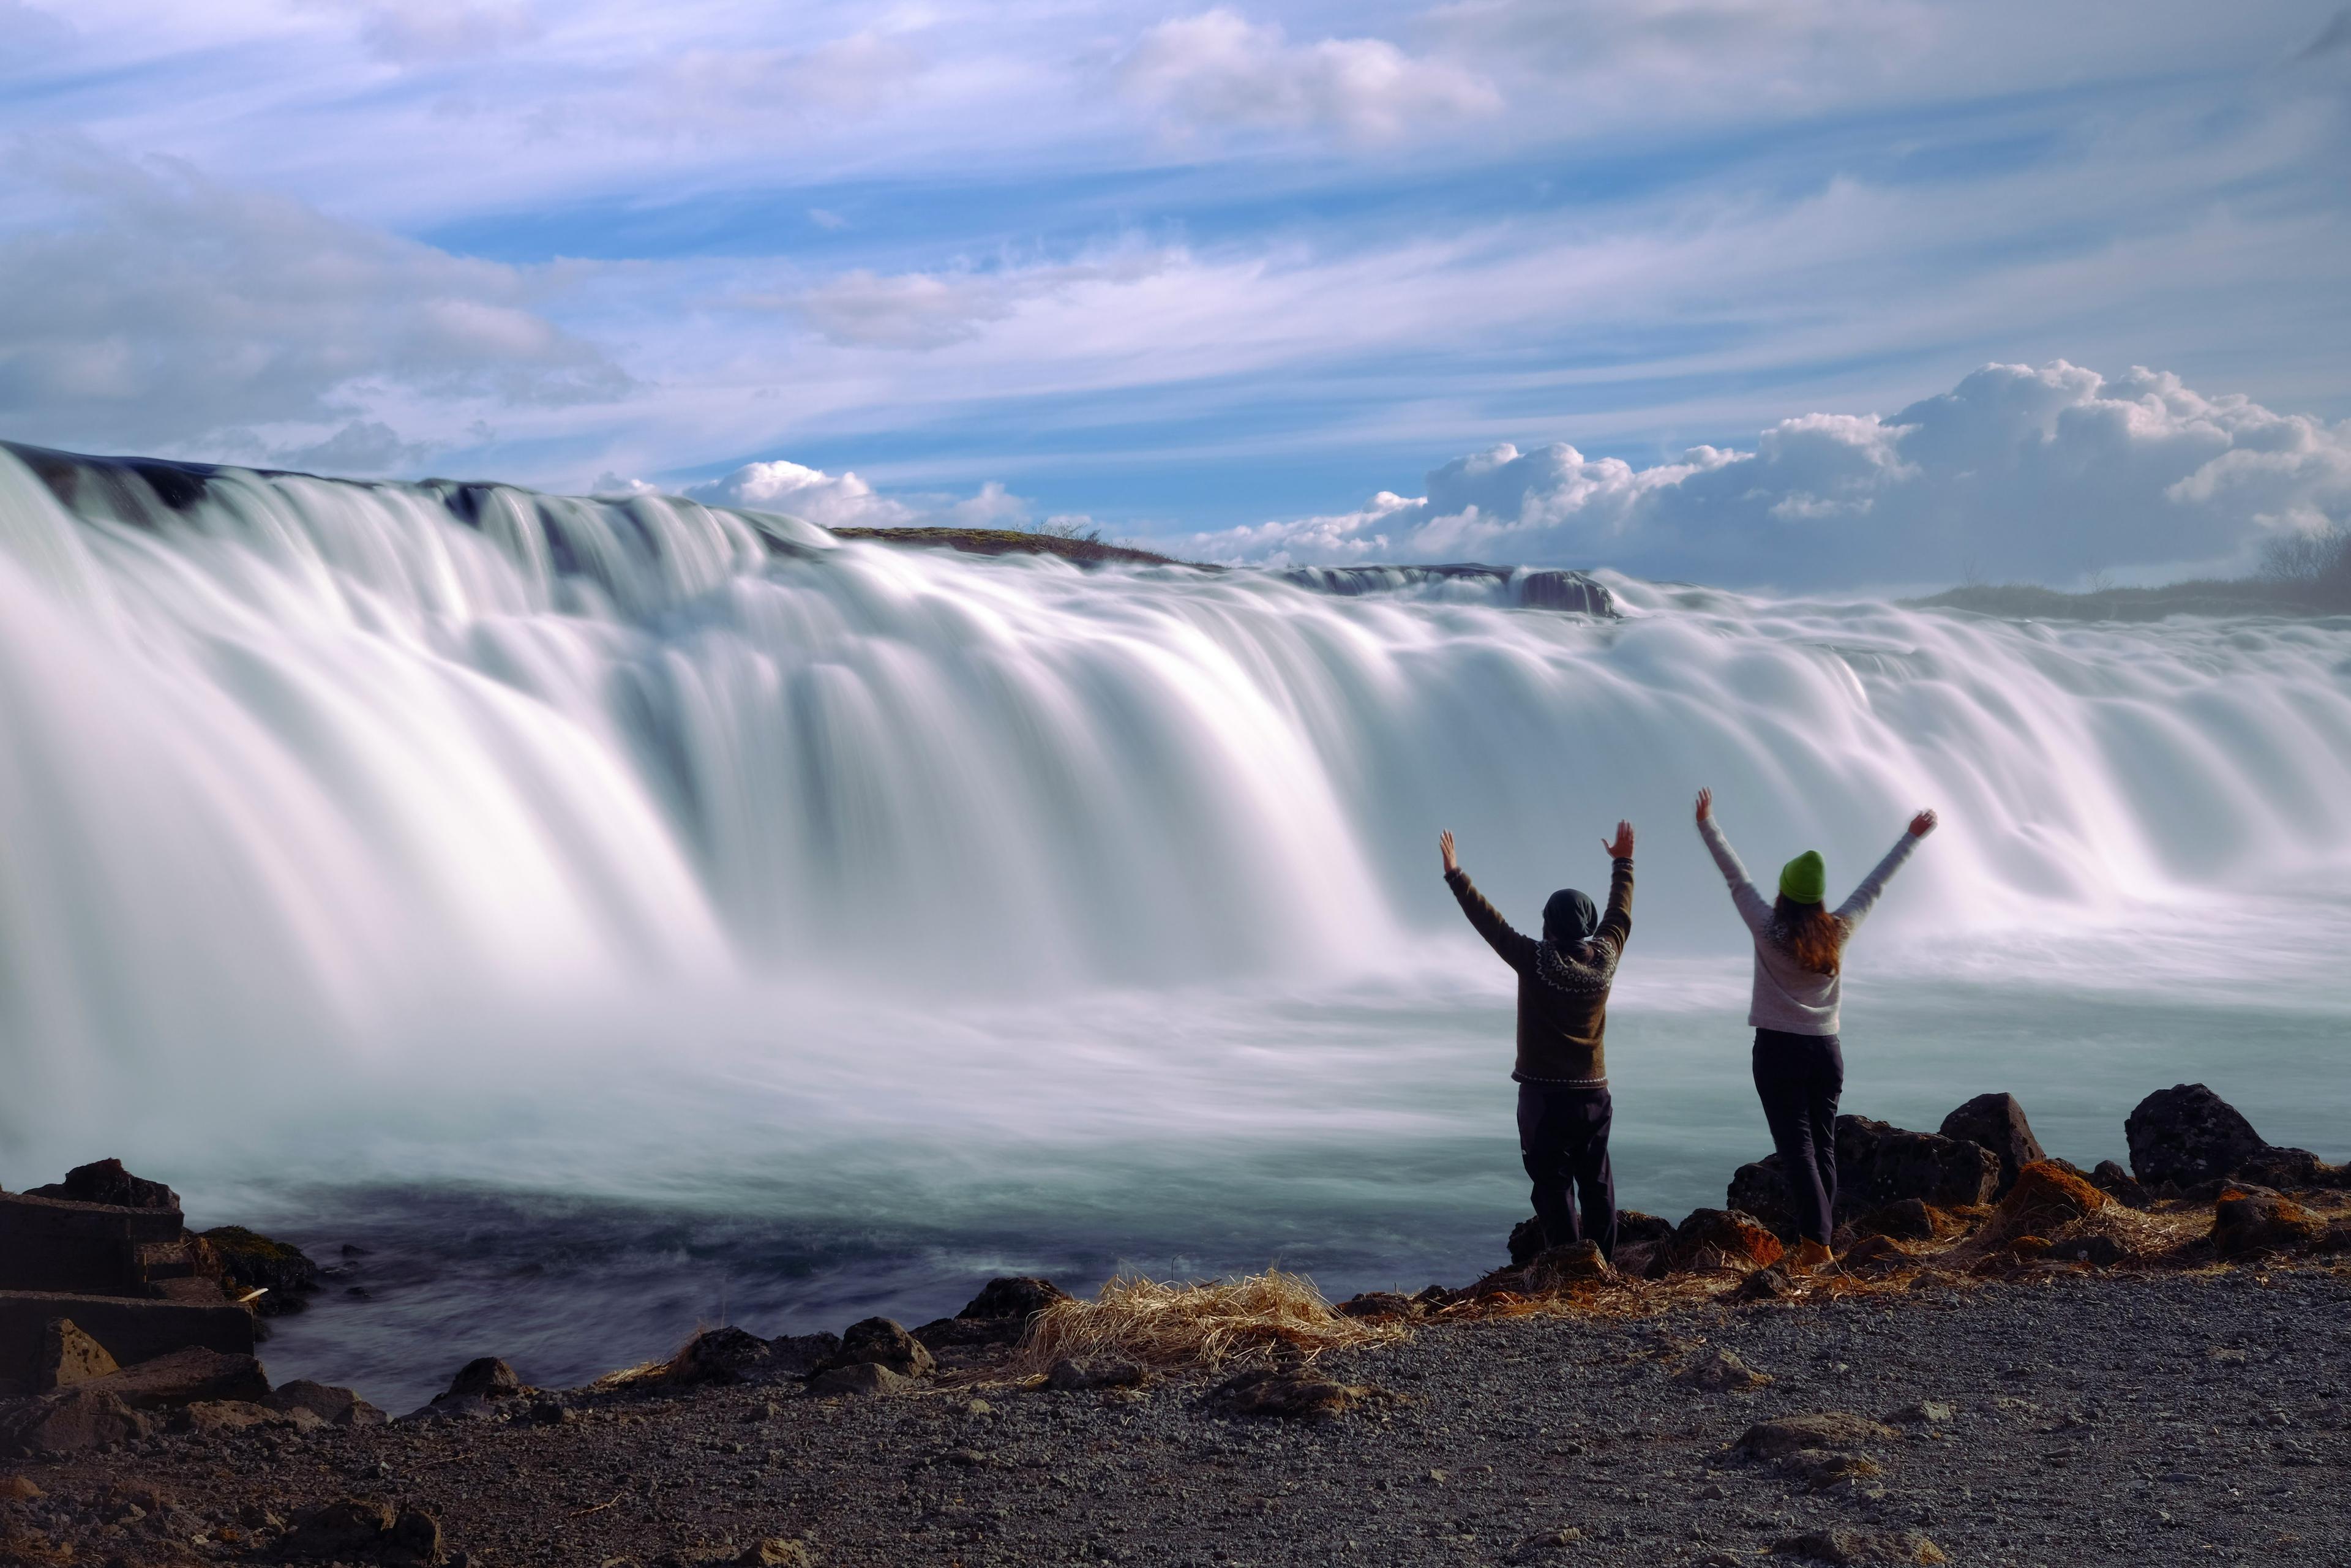 Two people with raised arms stand in front of a majestic, wide waterfall, their silhouettes expressing joy and freedom against the powerful and beautiful cascade under a cloudy sky.